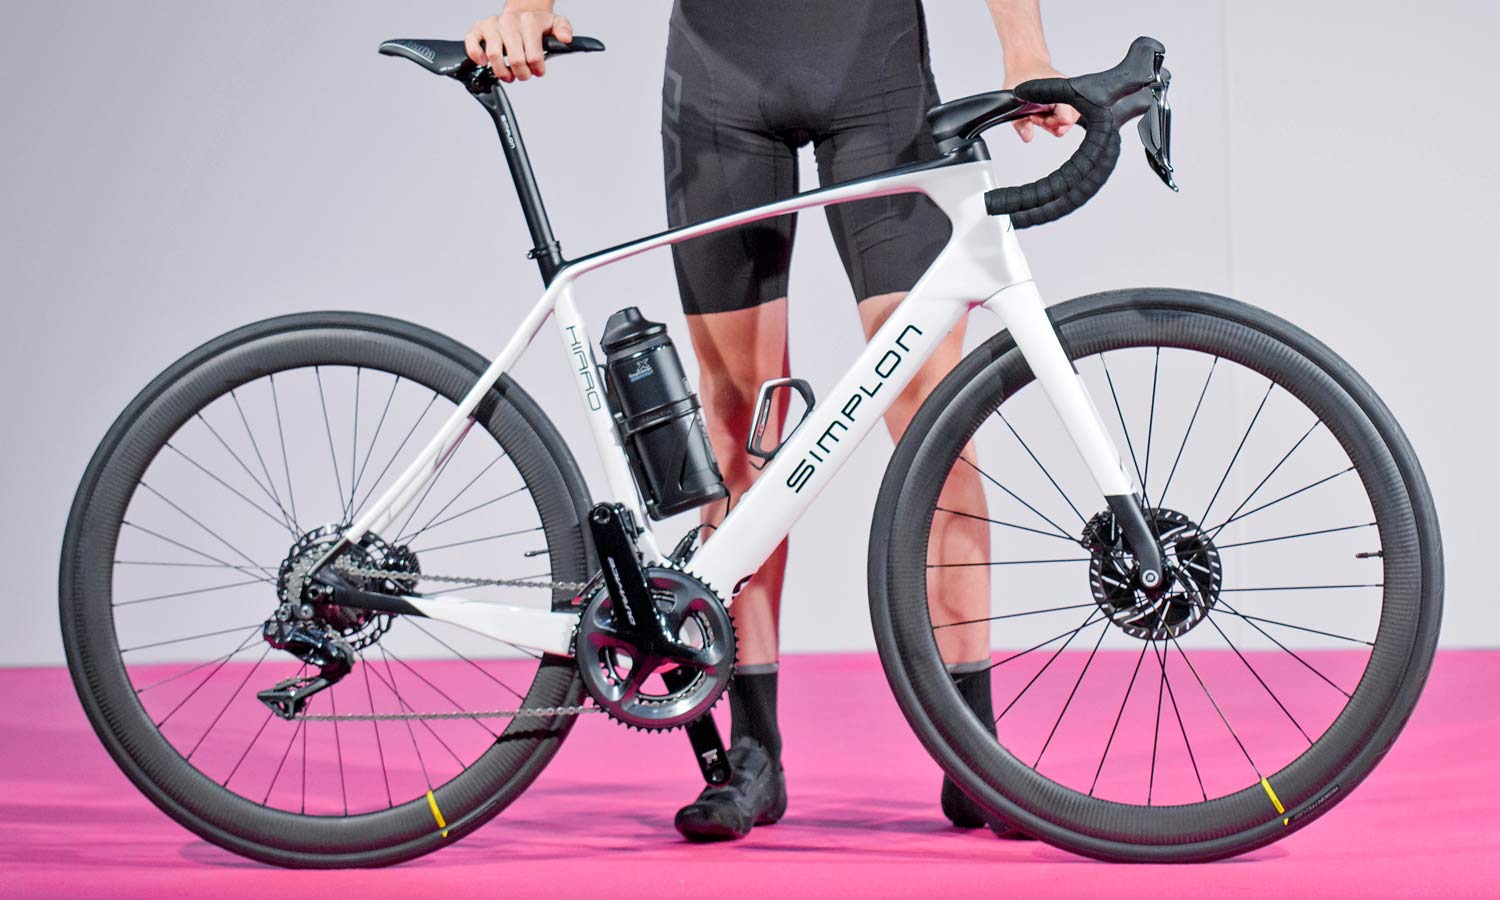 Eurobike 2019 - What's to come? all images courtesy EUROBIKE Friedrichshafen